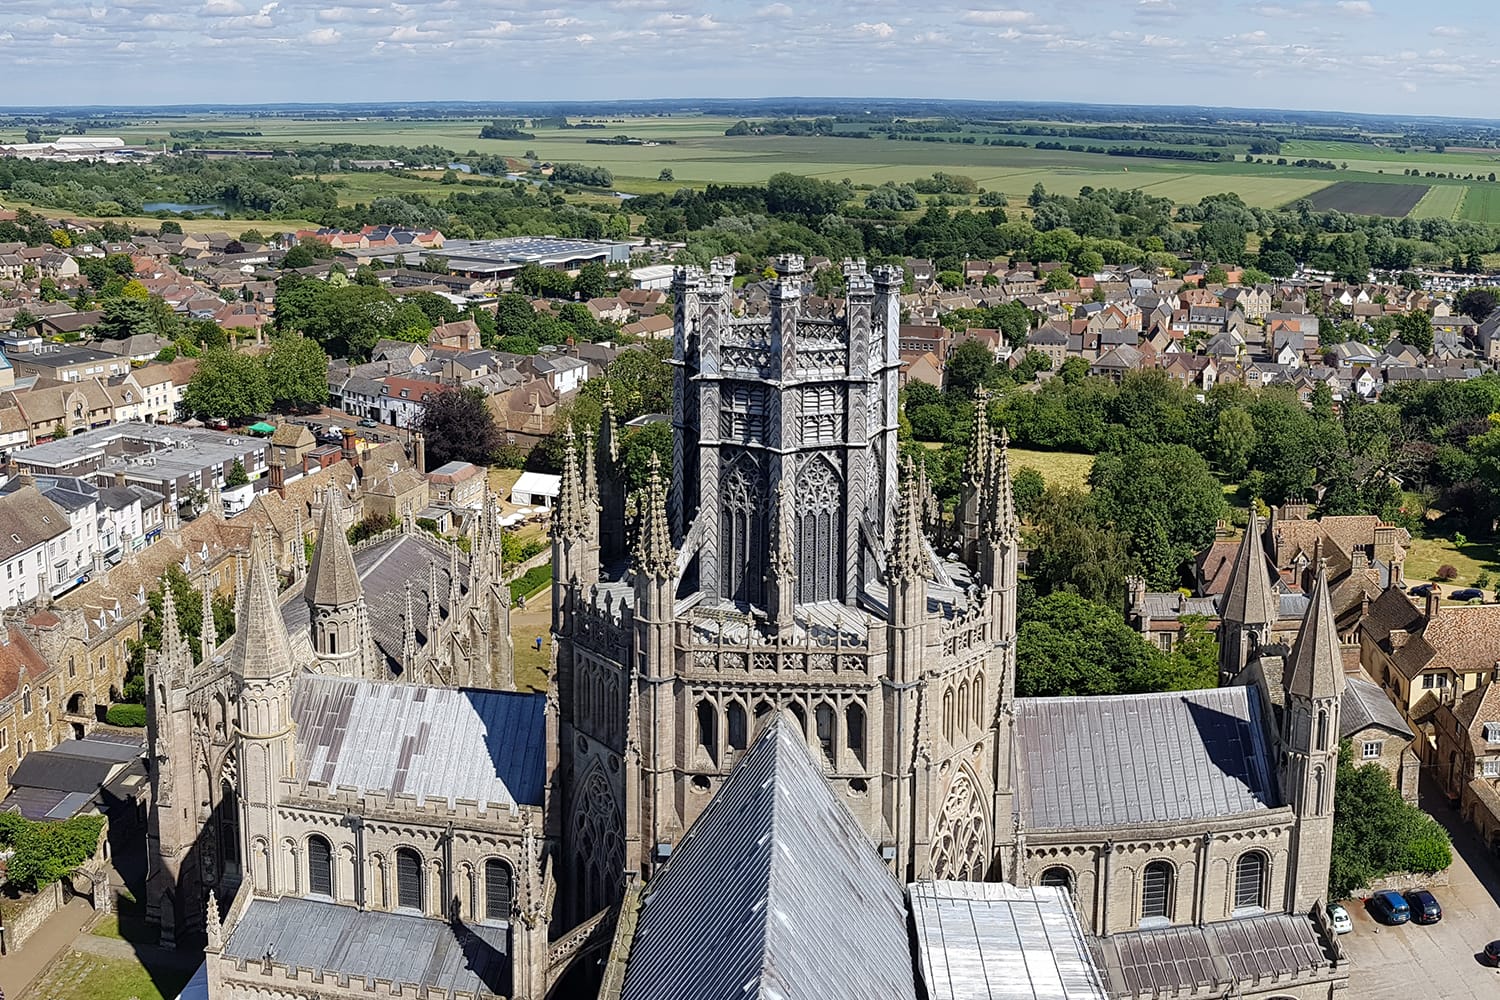 Panoramic views from the top of Ely Cathedral over looking the surrounding fens